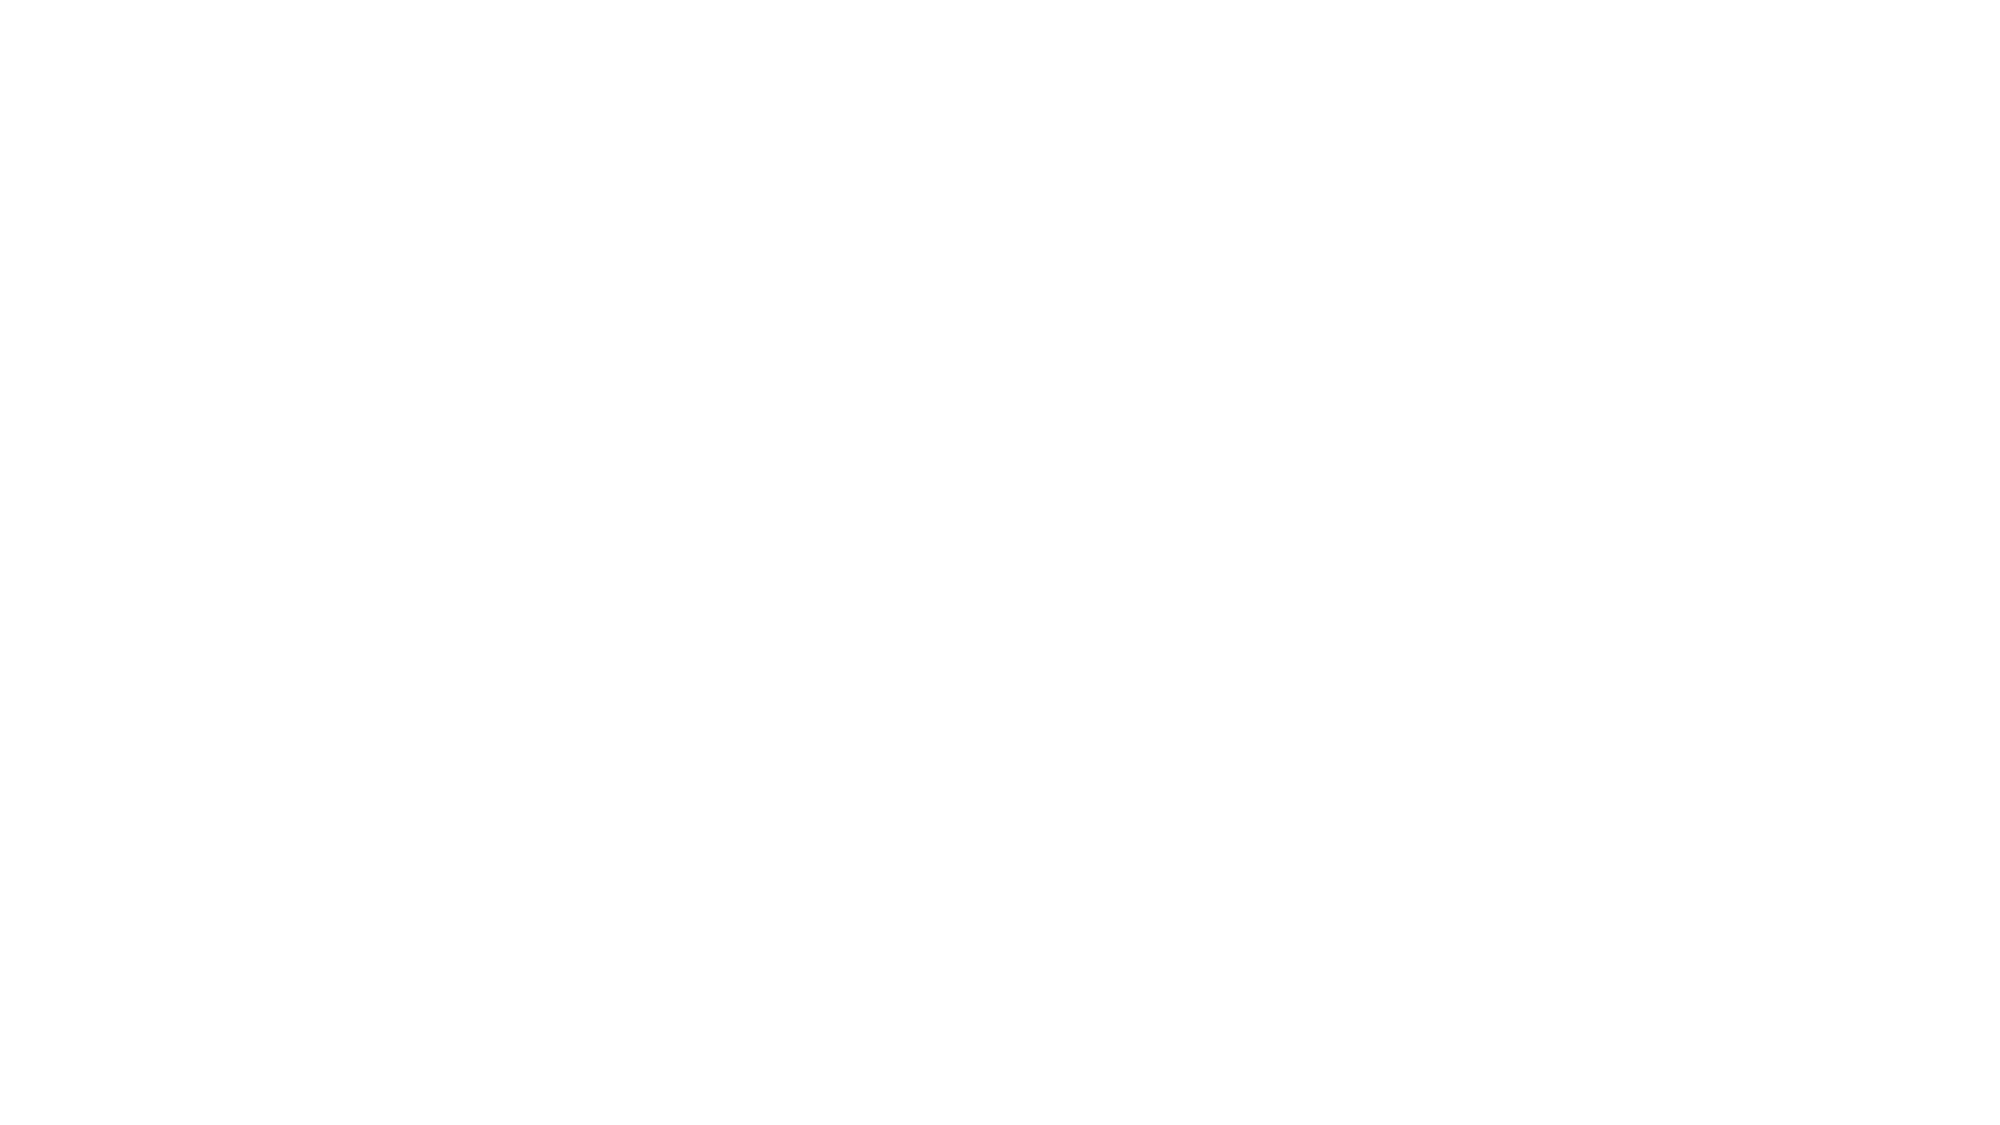 Bell Canada Logo from early 1970s